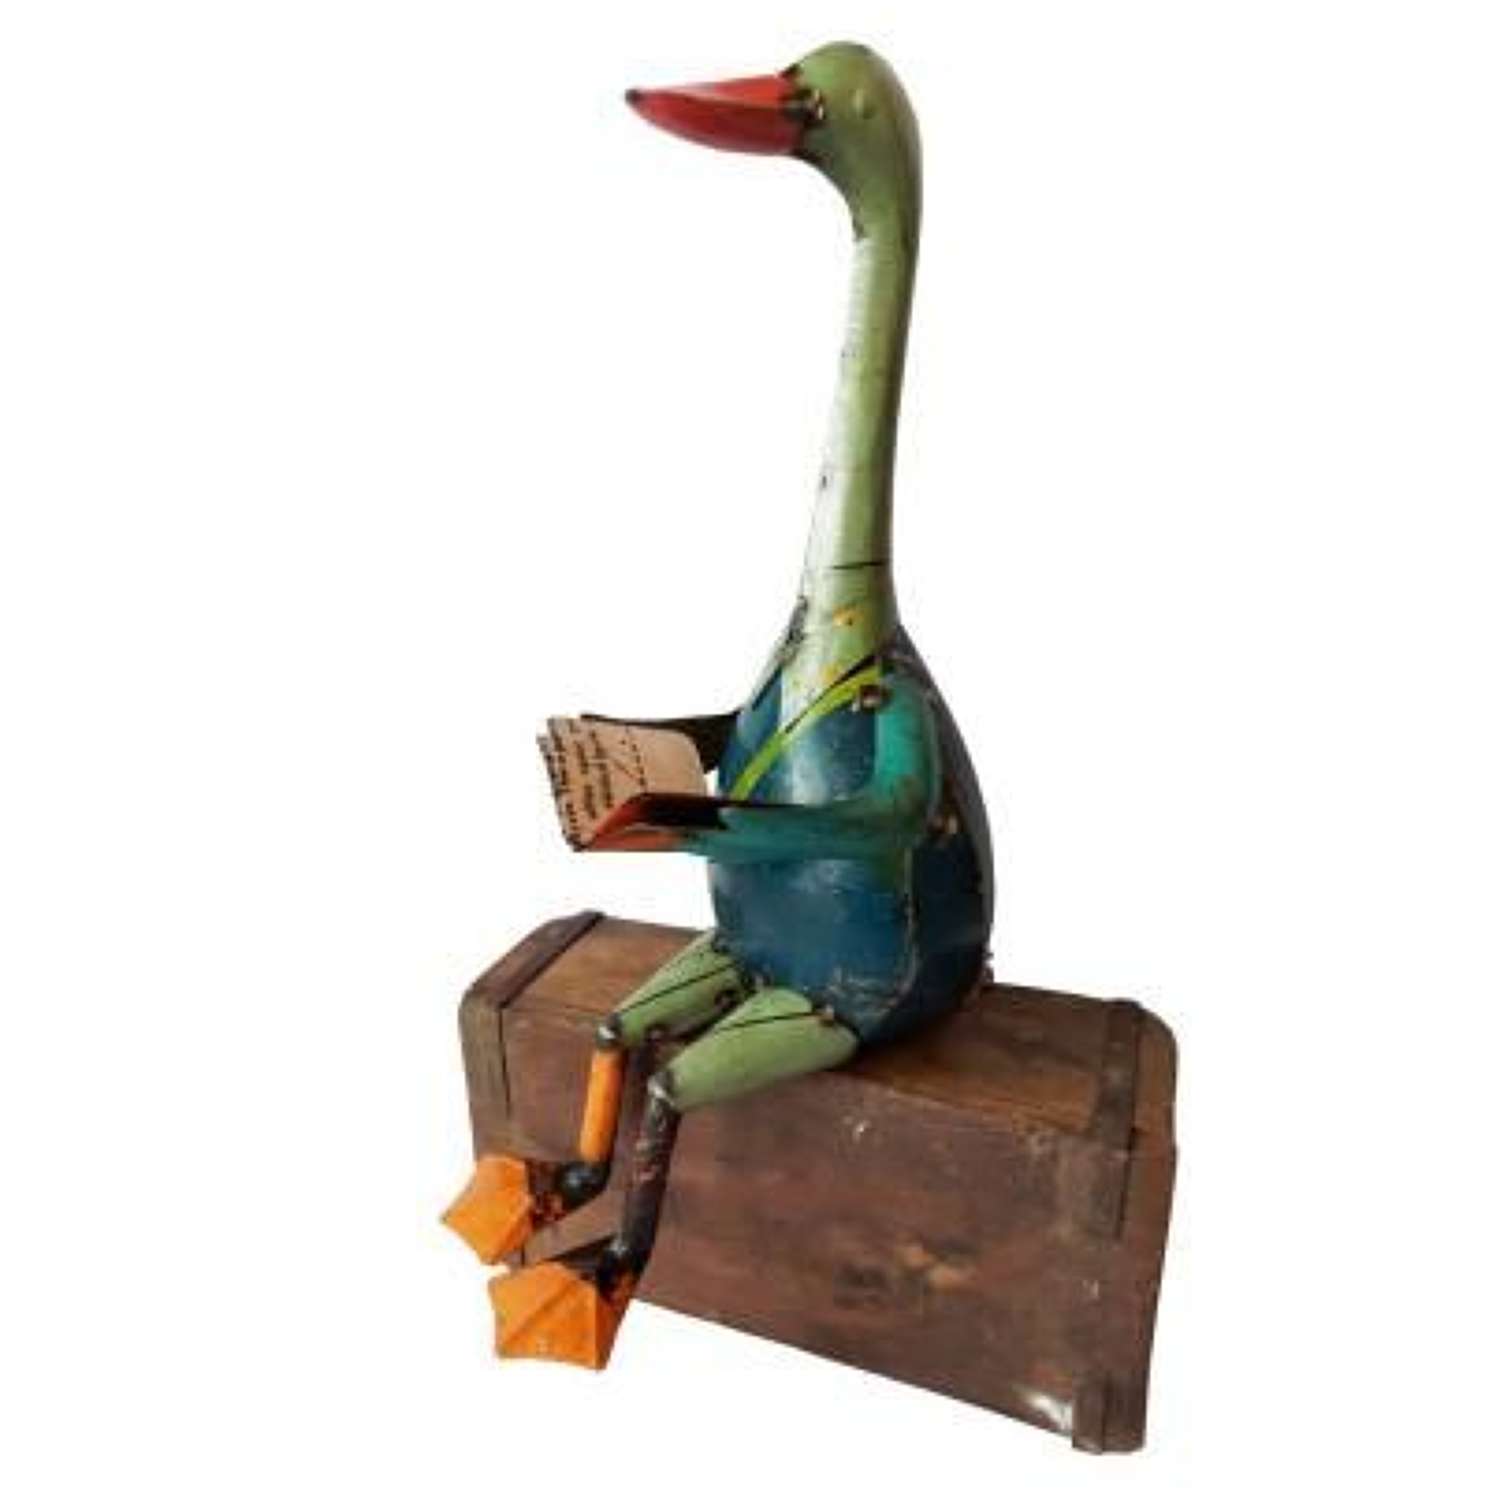 Recycled Iron Duck- Take a Break. Ref MH-6186